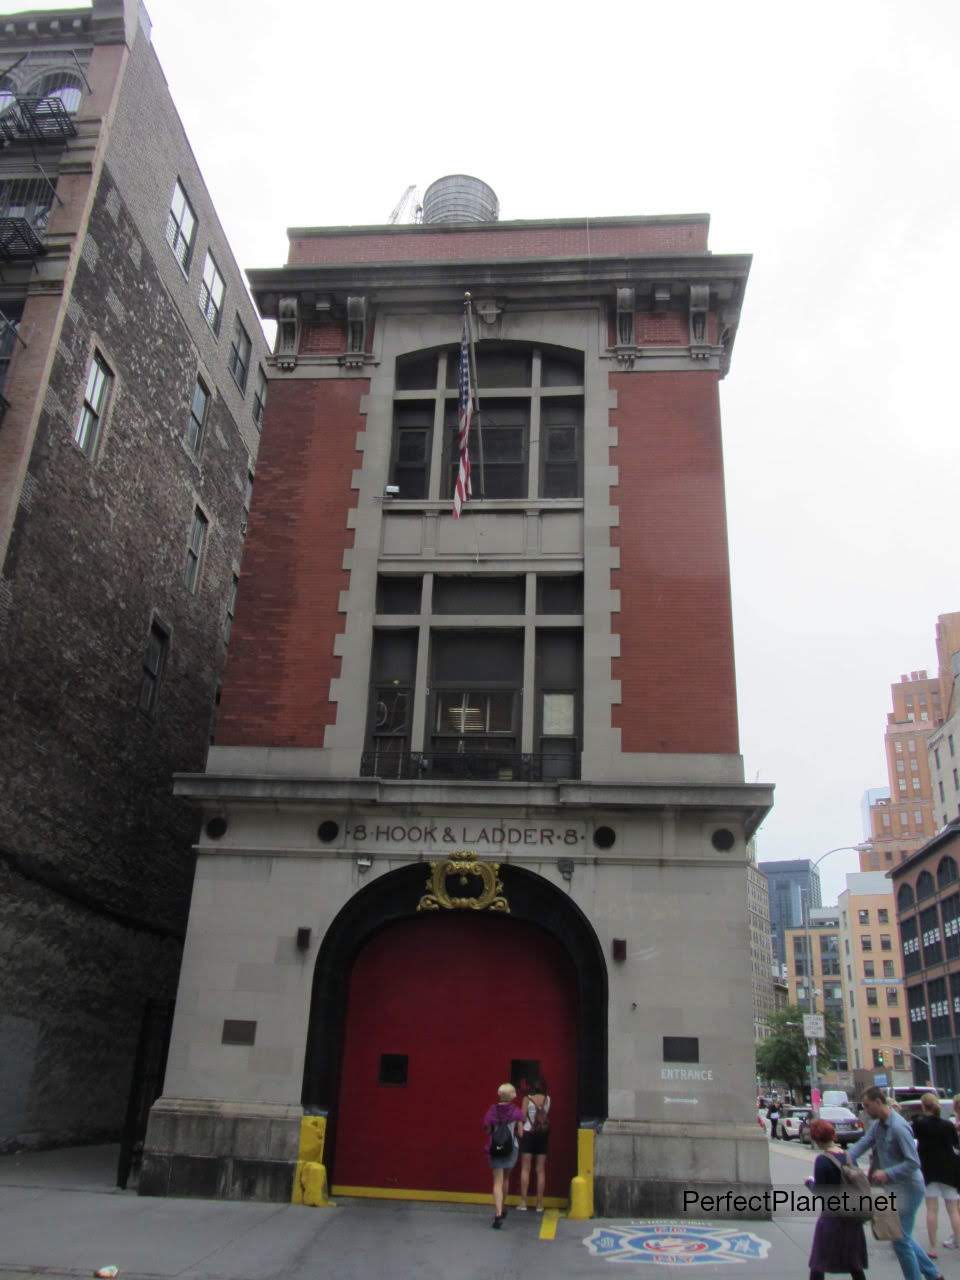 Fire station from the movie Ghostbusters